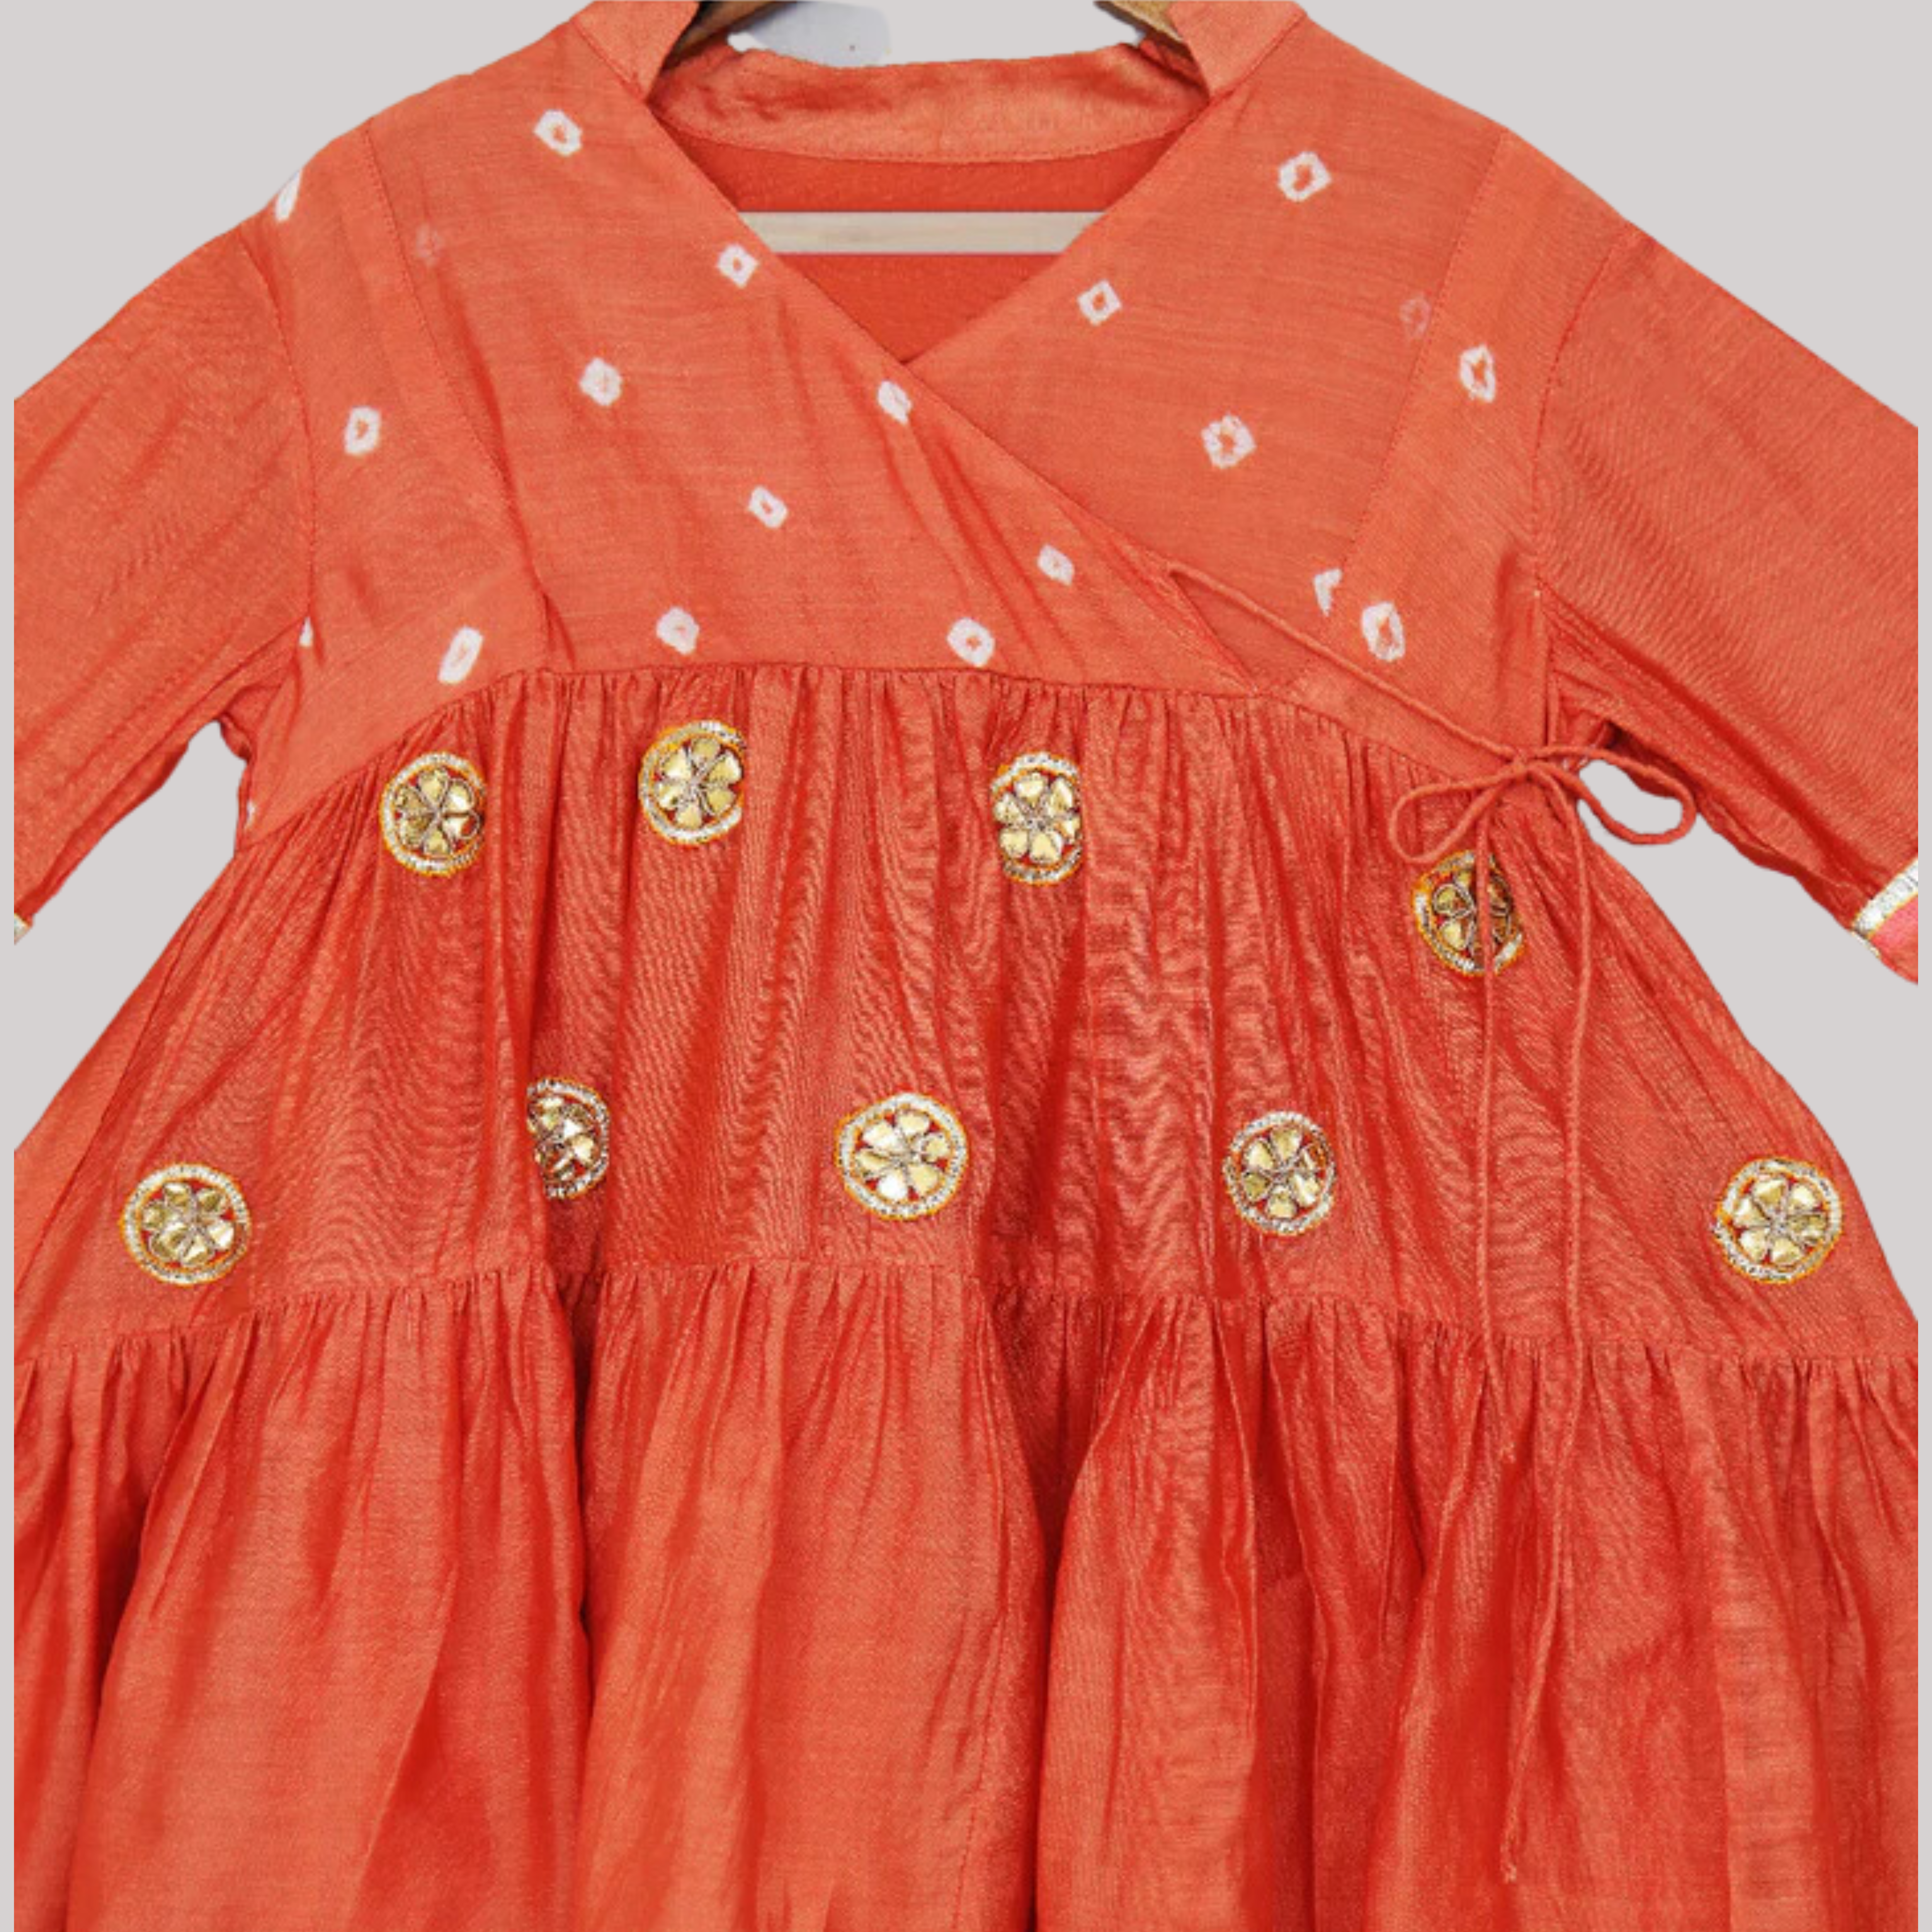 Little girl in a vibrant orange ethnic dress adorned with laces and gota flowers.